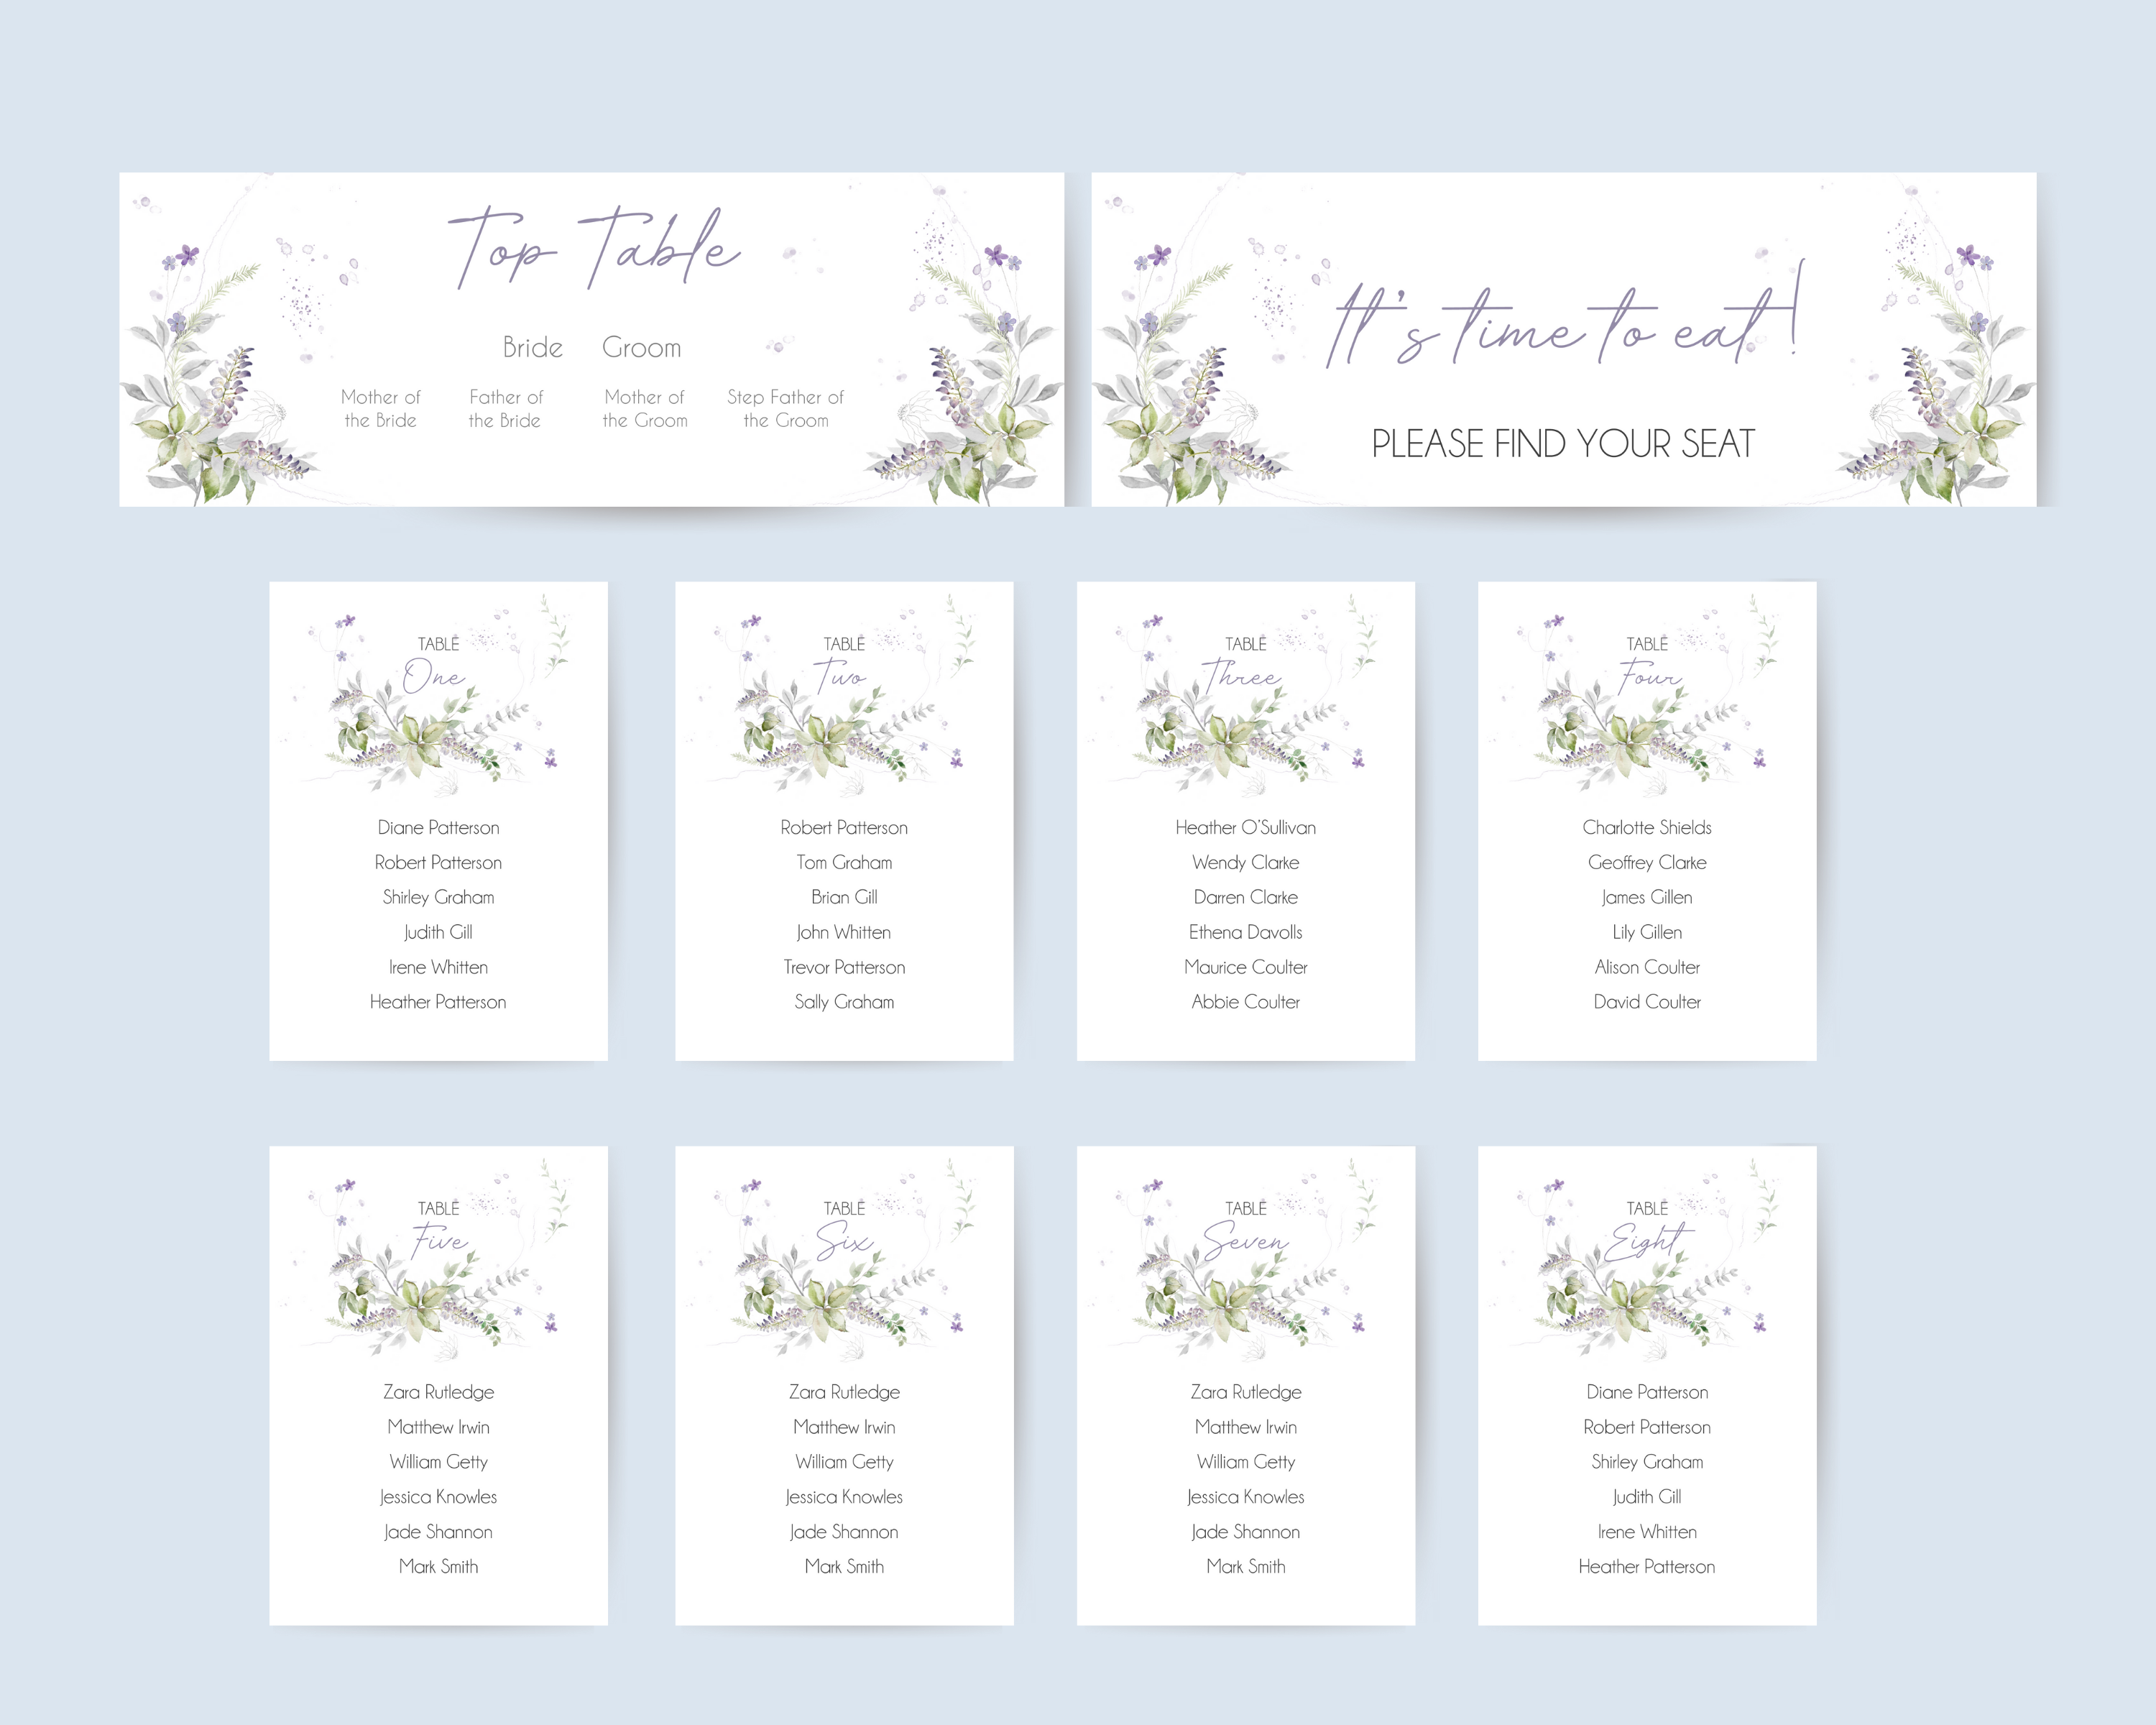 A set of Poppleberry lavender & greenery wedding table plan cards, including 'find your seat', 'top table' and 'A6 table' cards, on a plain background.